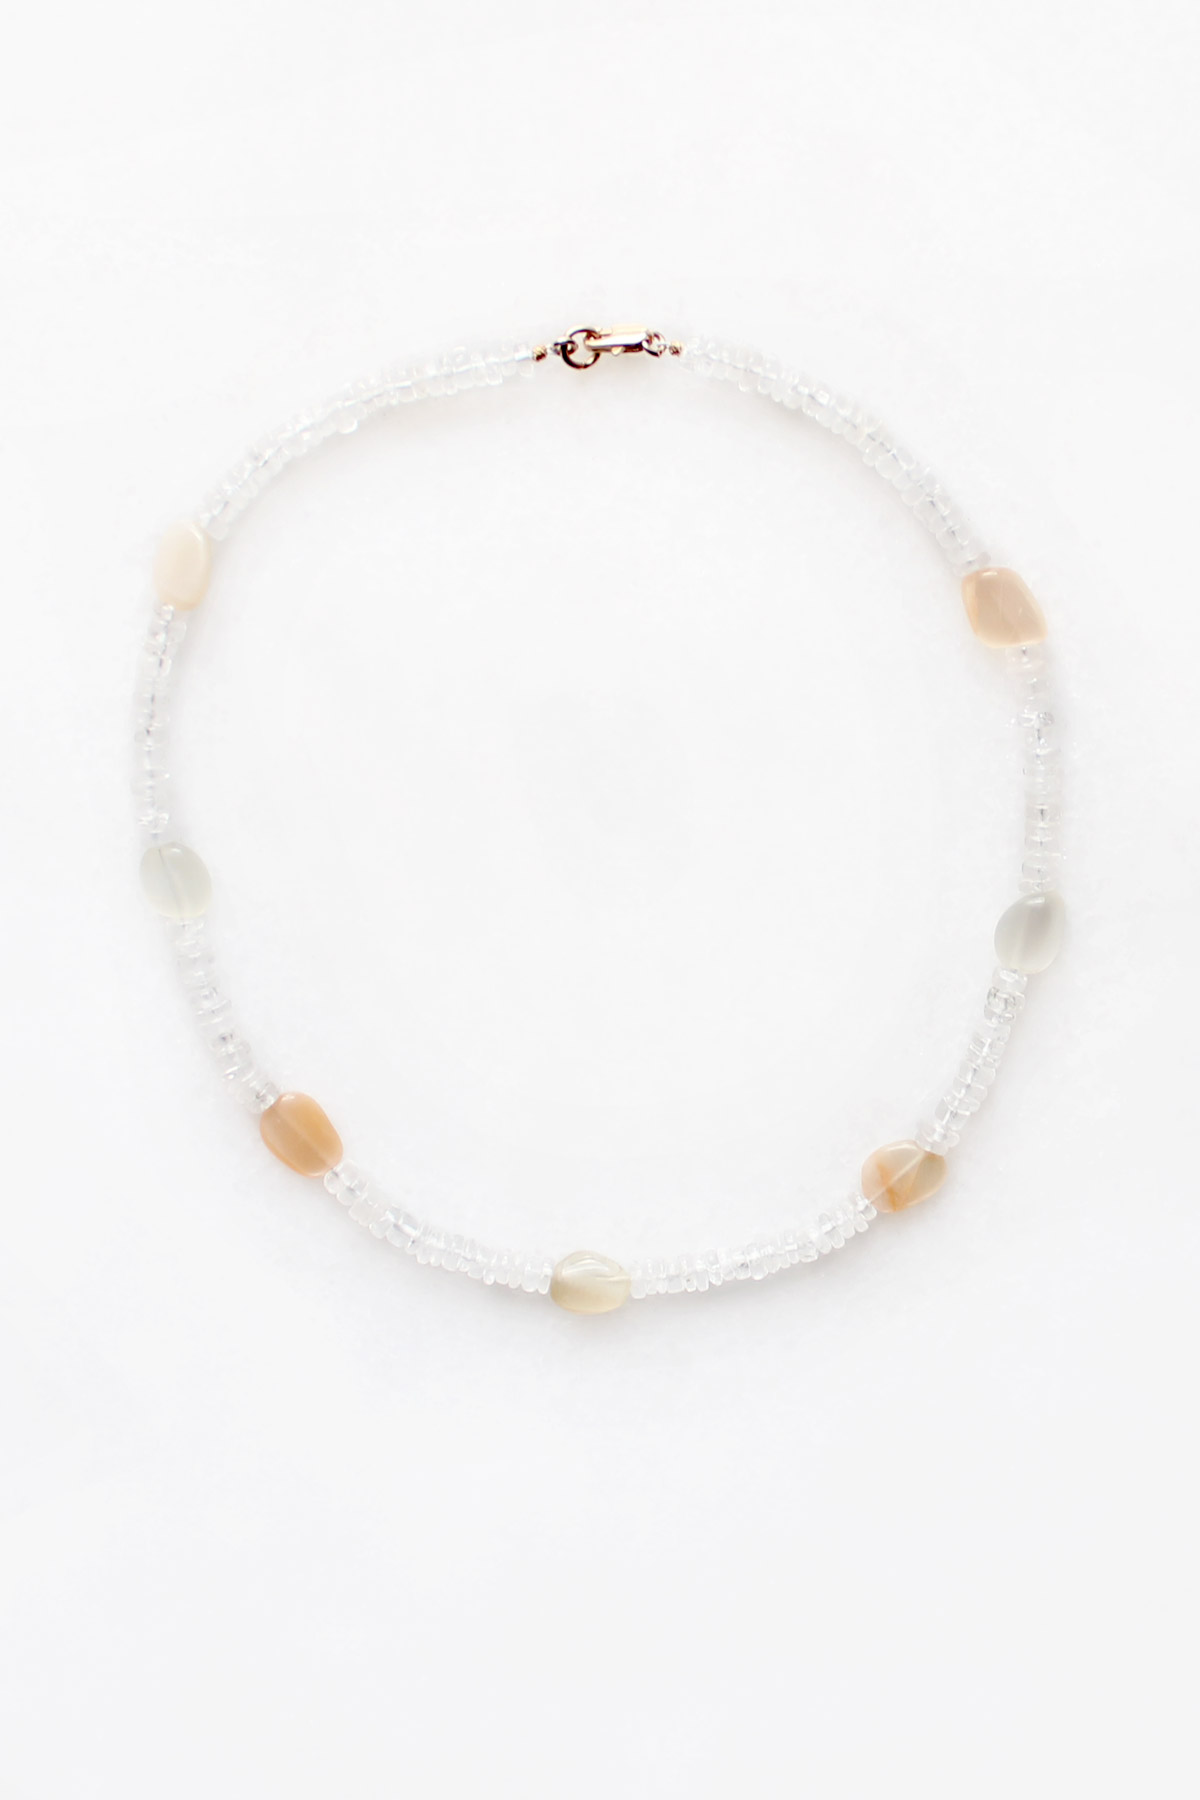 Moonstone and Quartz Necklace by The Vamoose